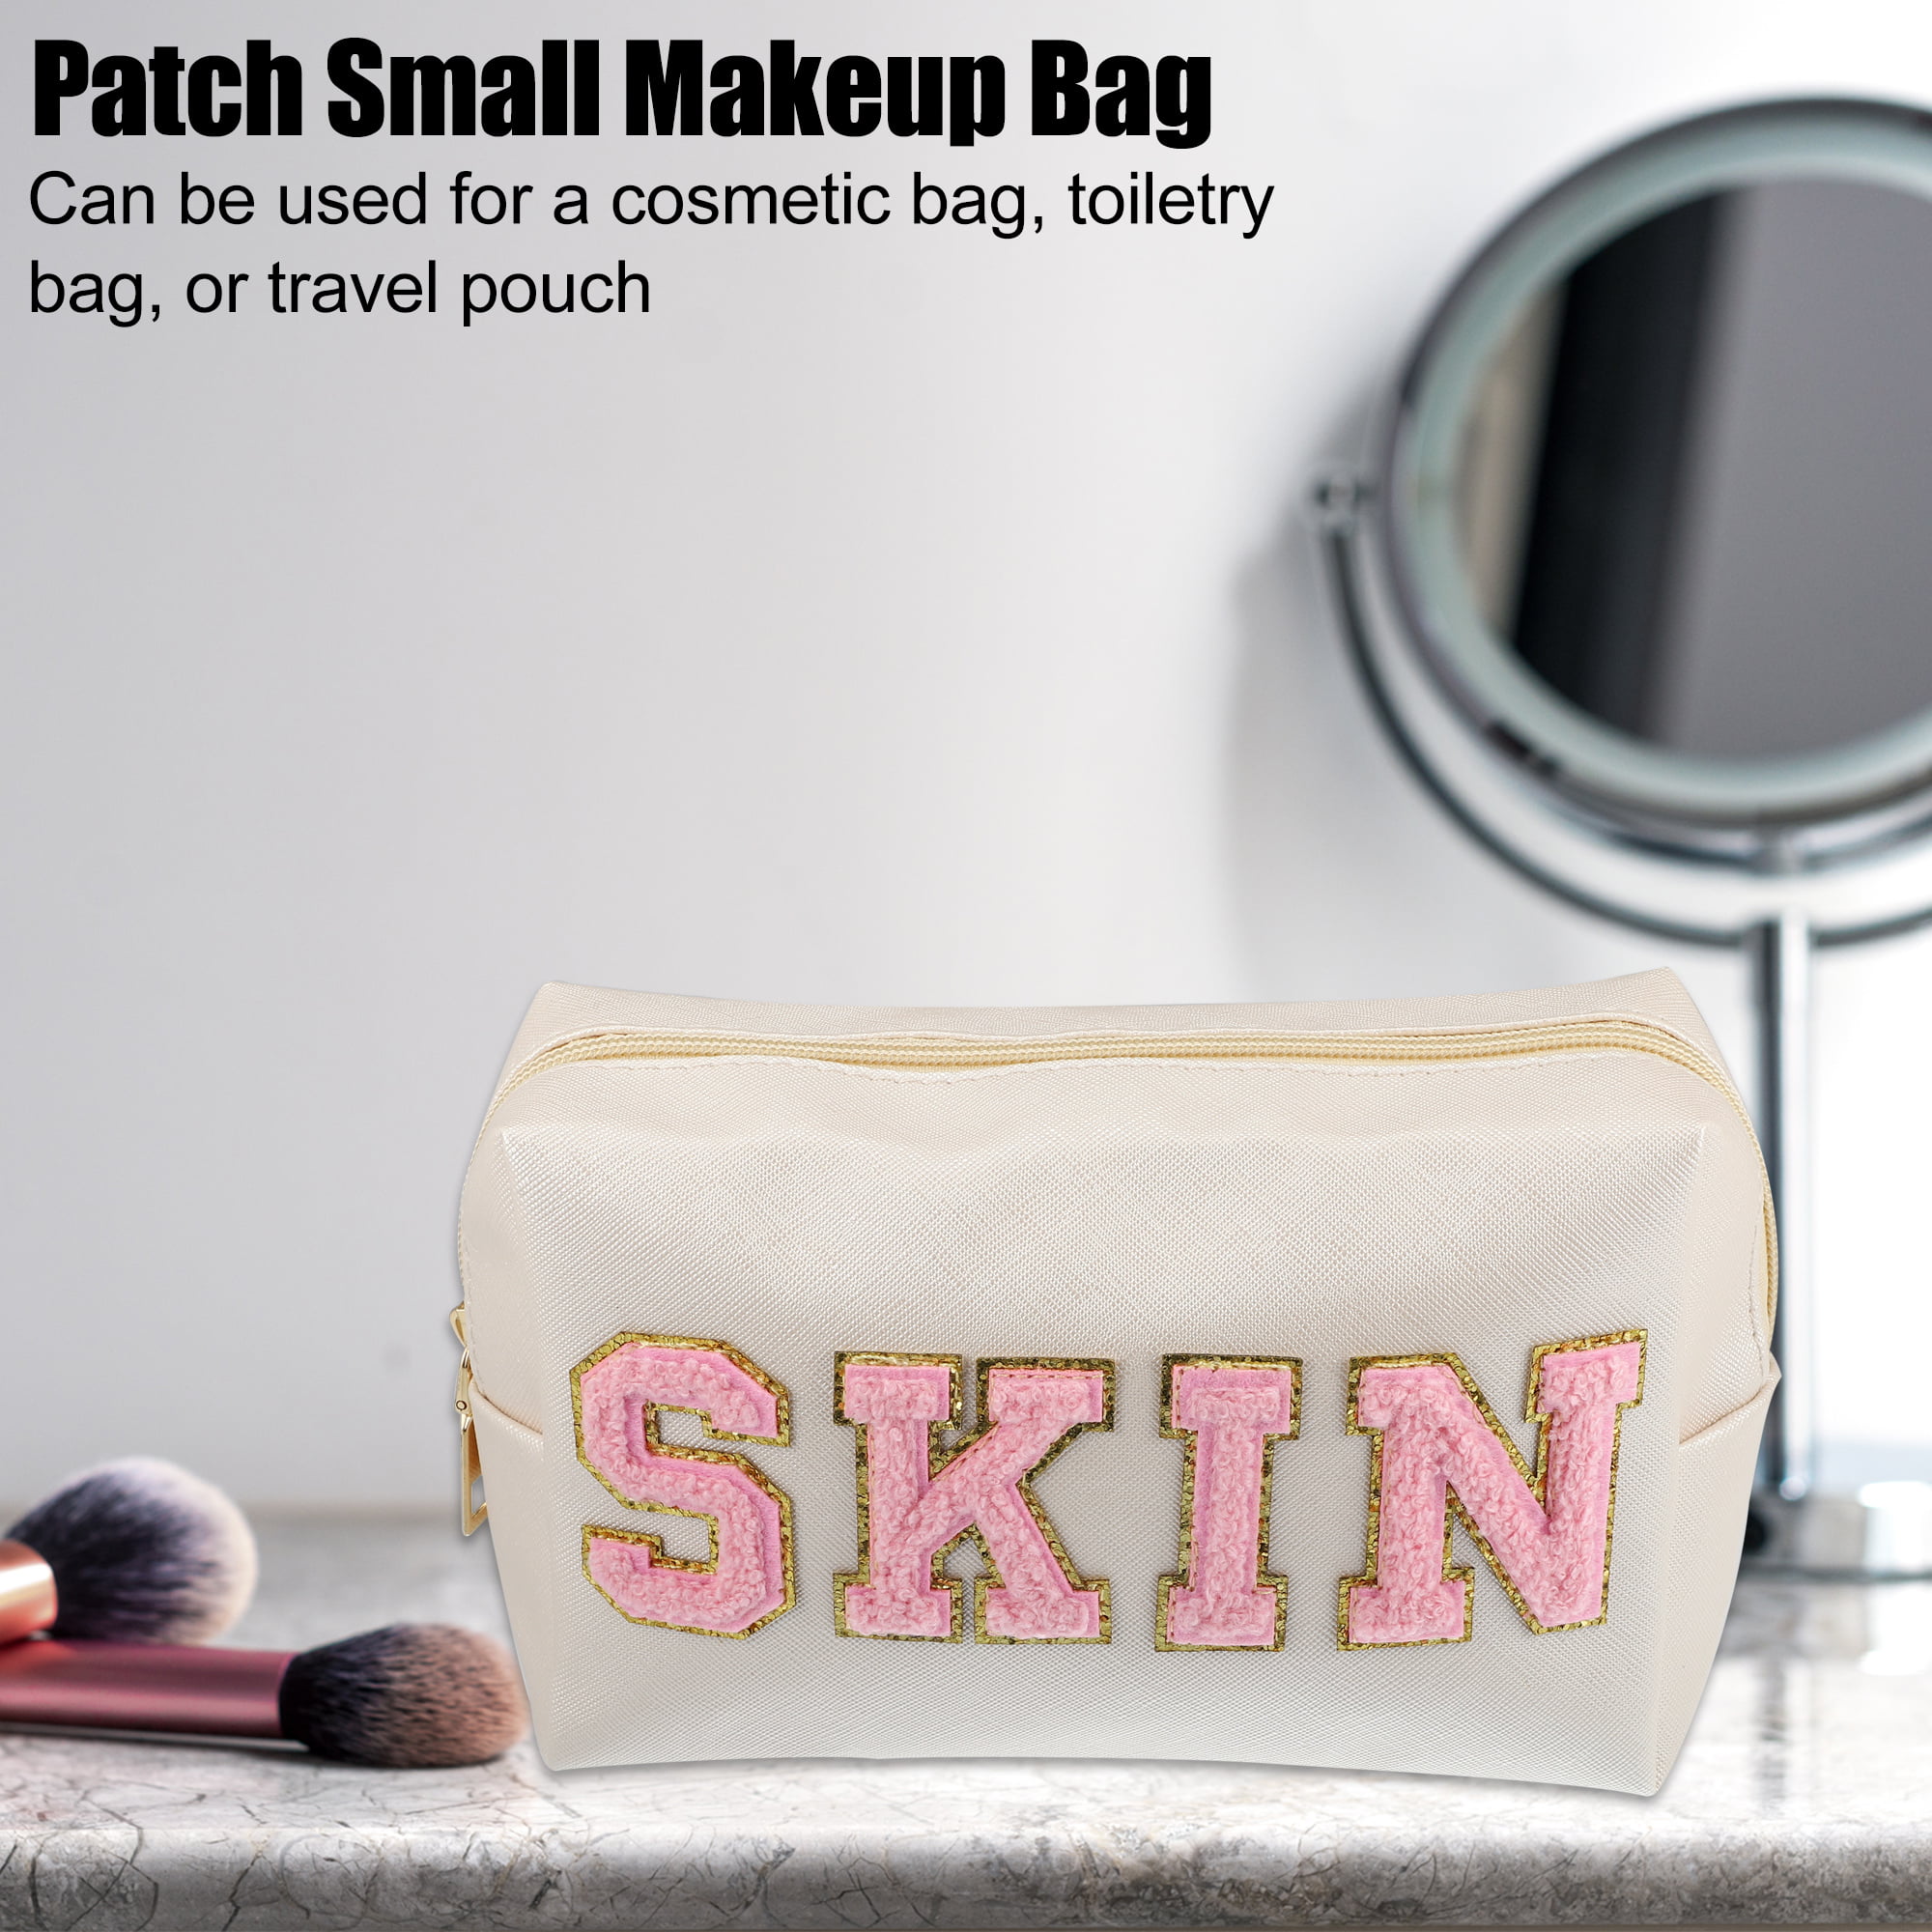 Unique Bargains Patch Small Makeup Bag Alphabet Pattern Toiletry Bag Travel Cosmetic Organizer for Women Daily Use Pink